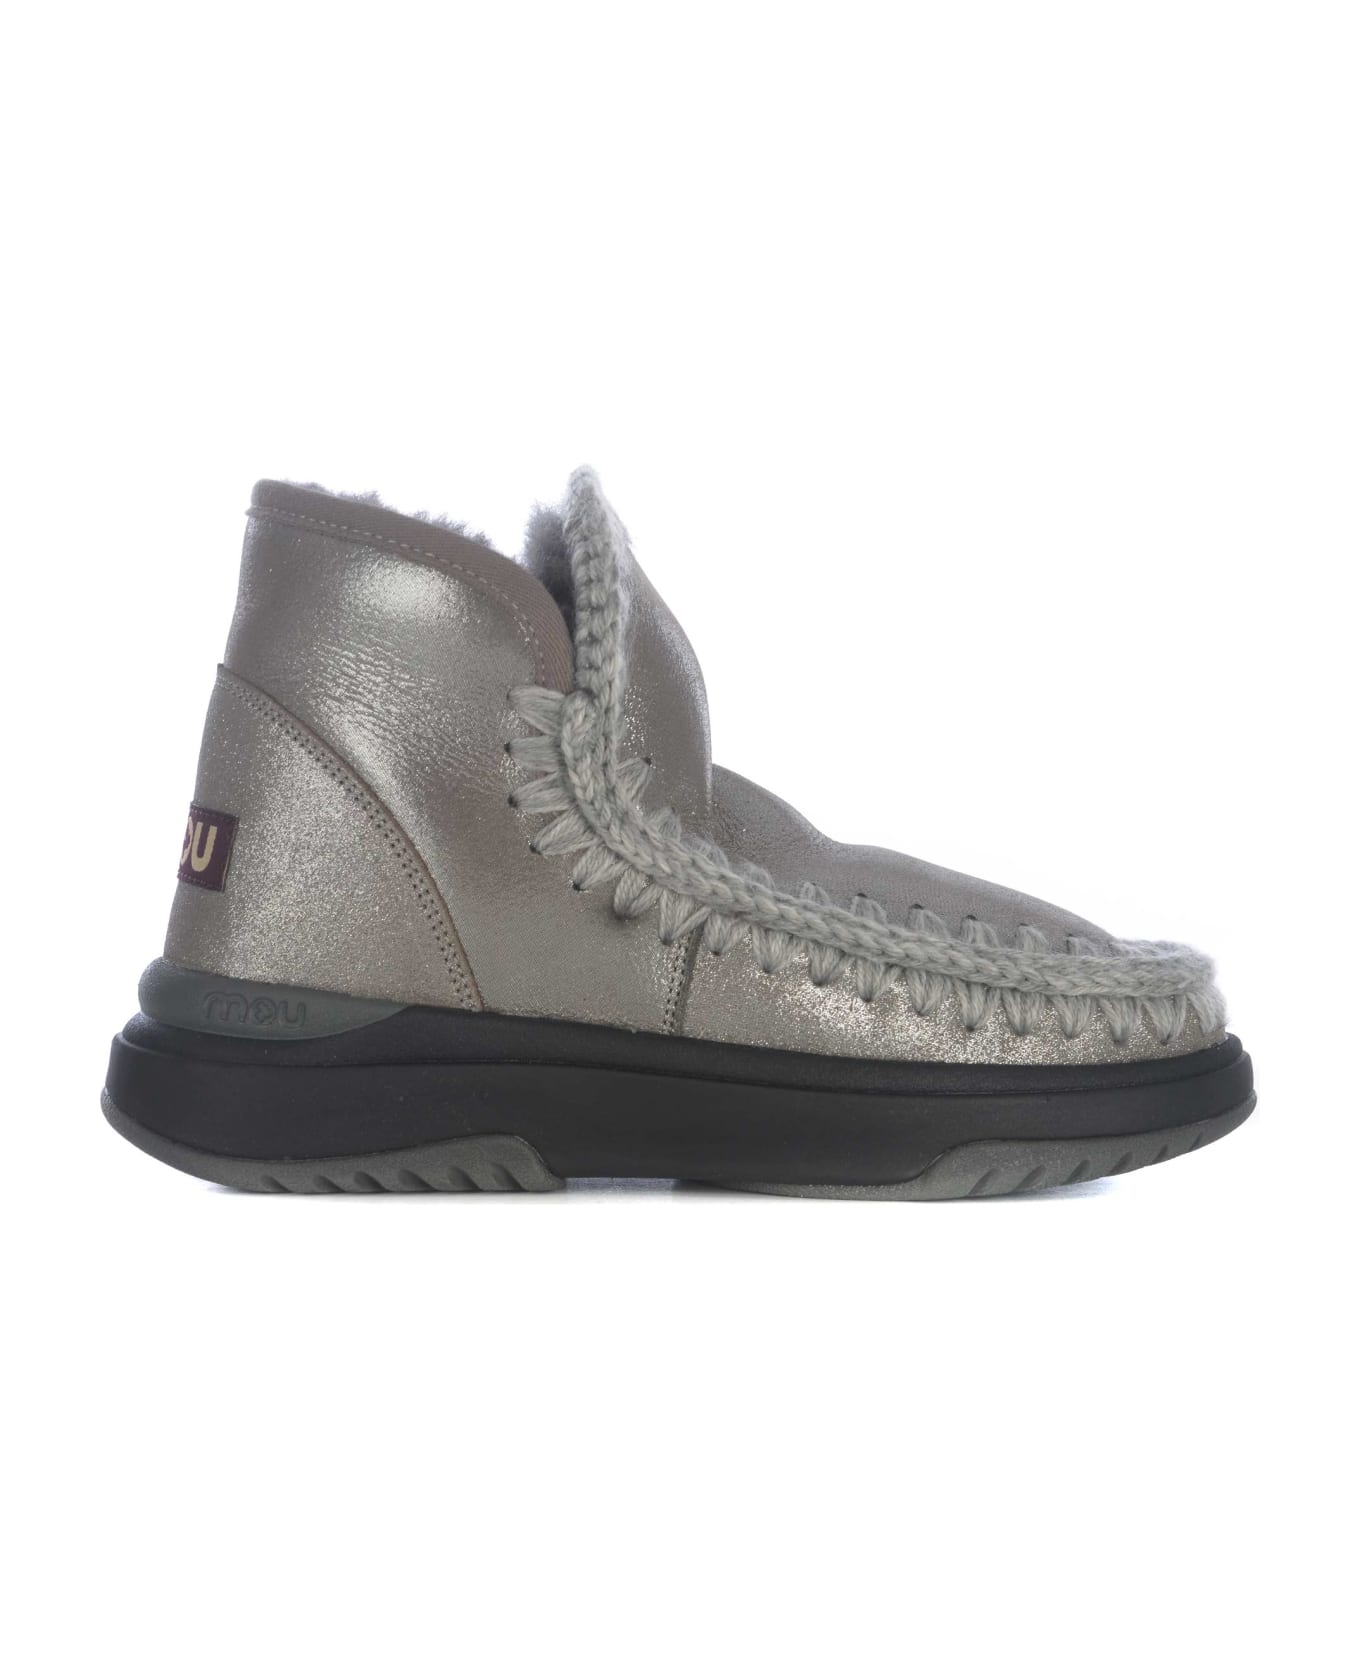 Mou Ankle Boots Mou "eskimo Jogger" Made Of Leather - Grigio argento